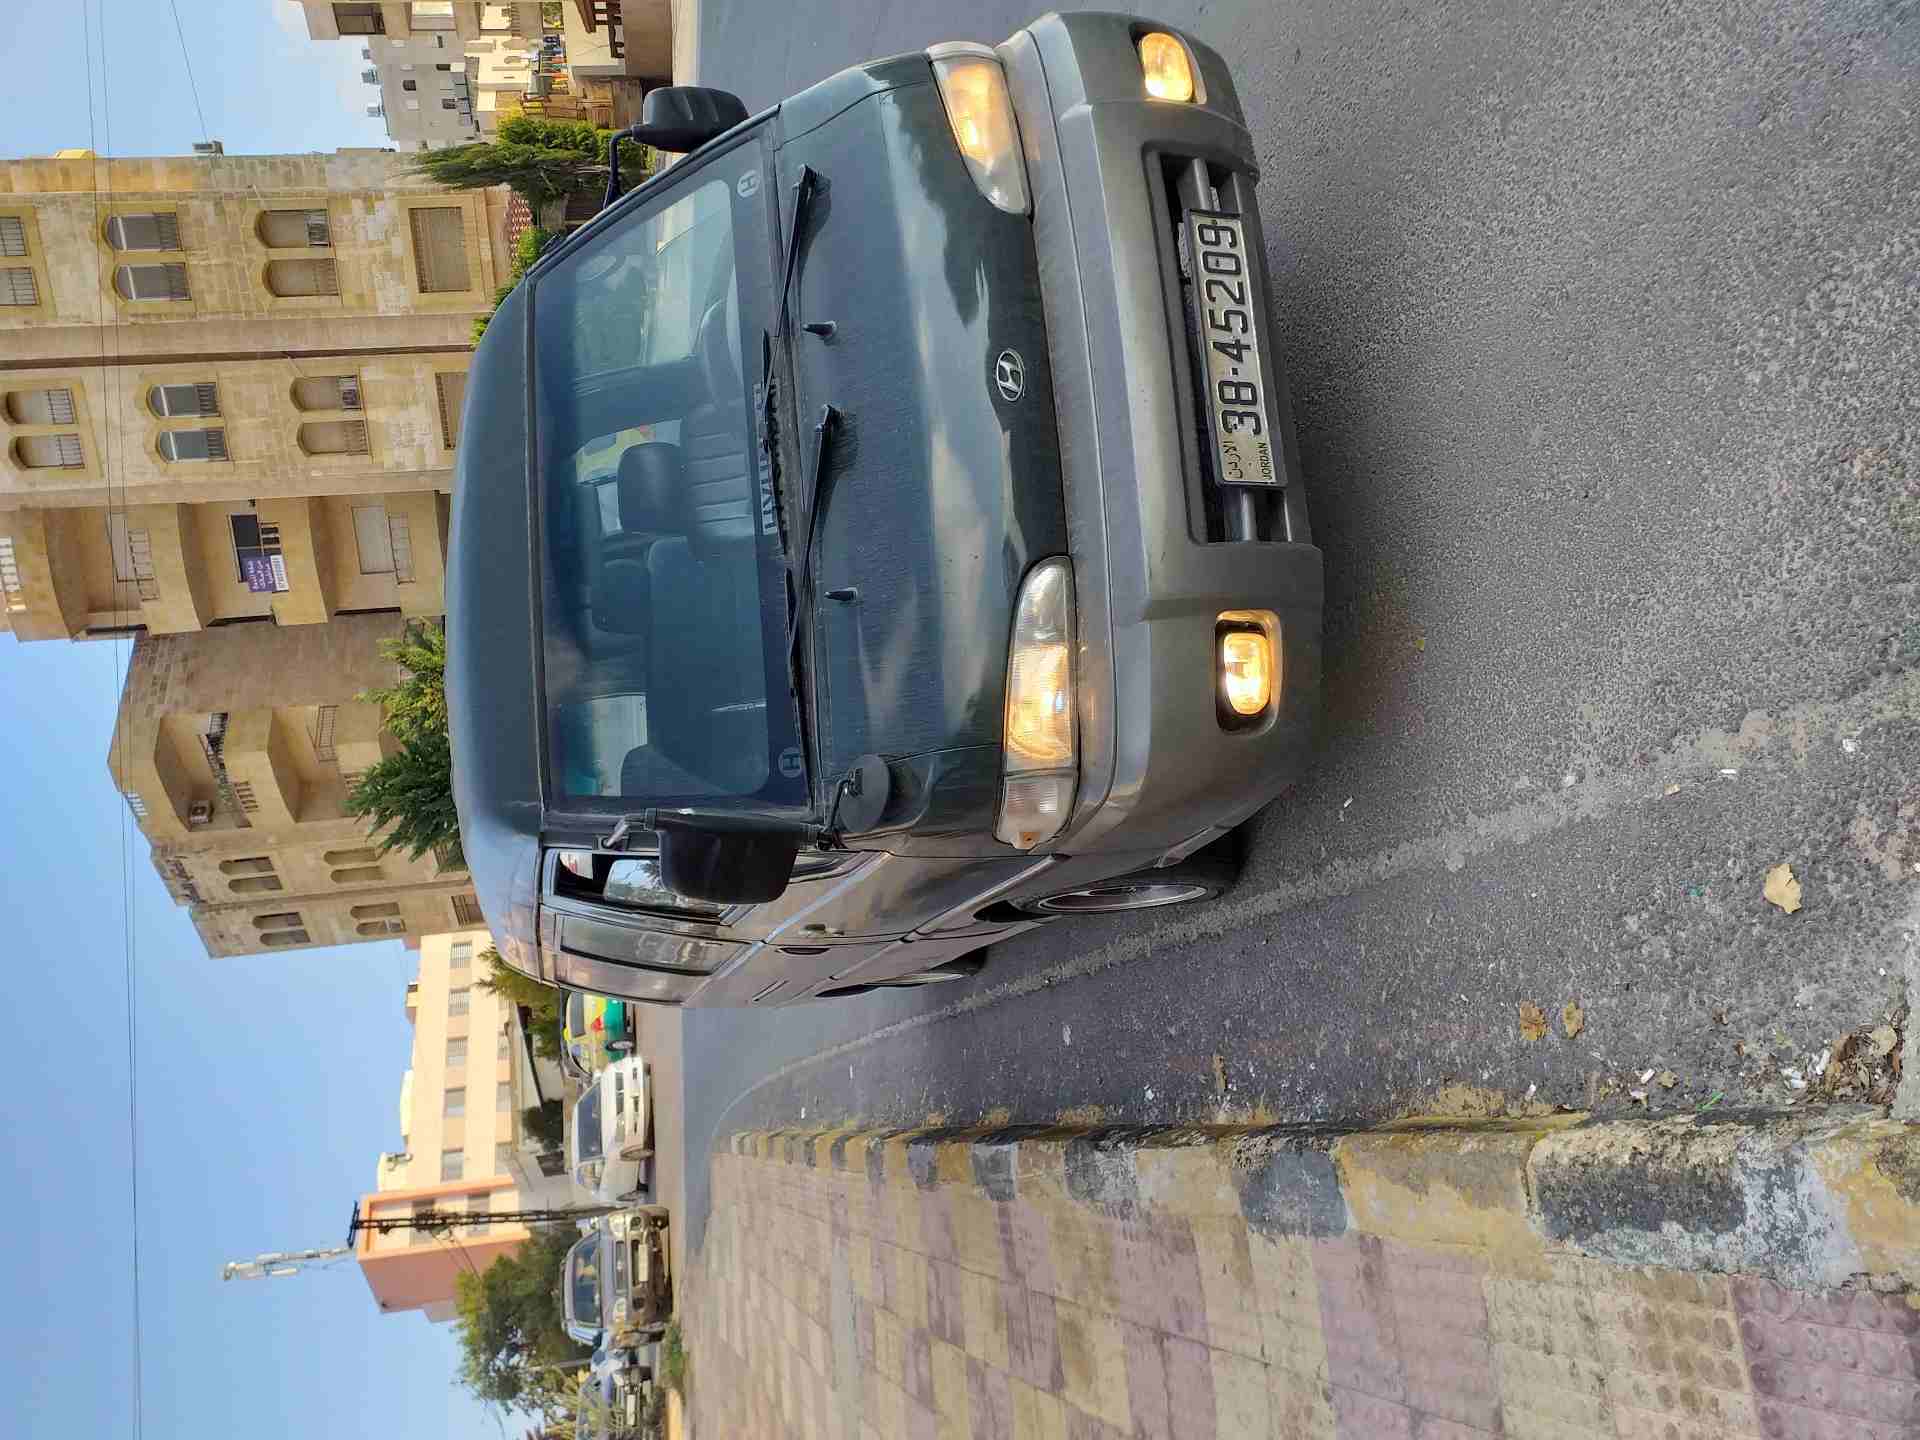 2015 Toyota FJ Cruiser for sale, still very clean in and out. The car is in good and perfect condition, The car has perfect tires and it is GCC Specs. Intereste-  هونداي H100 موديل 1997...